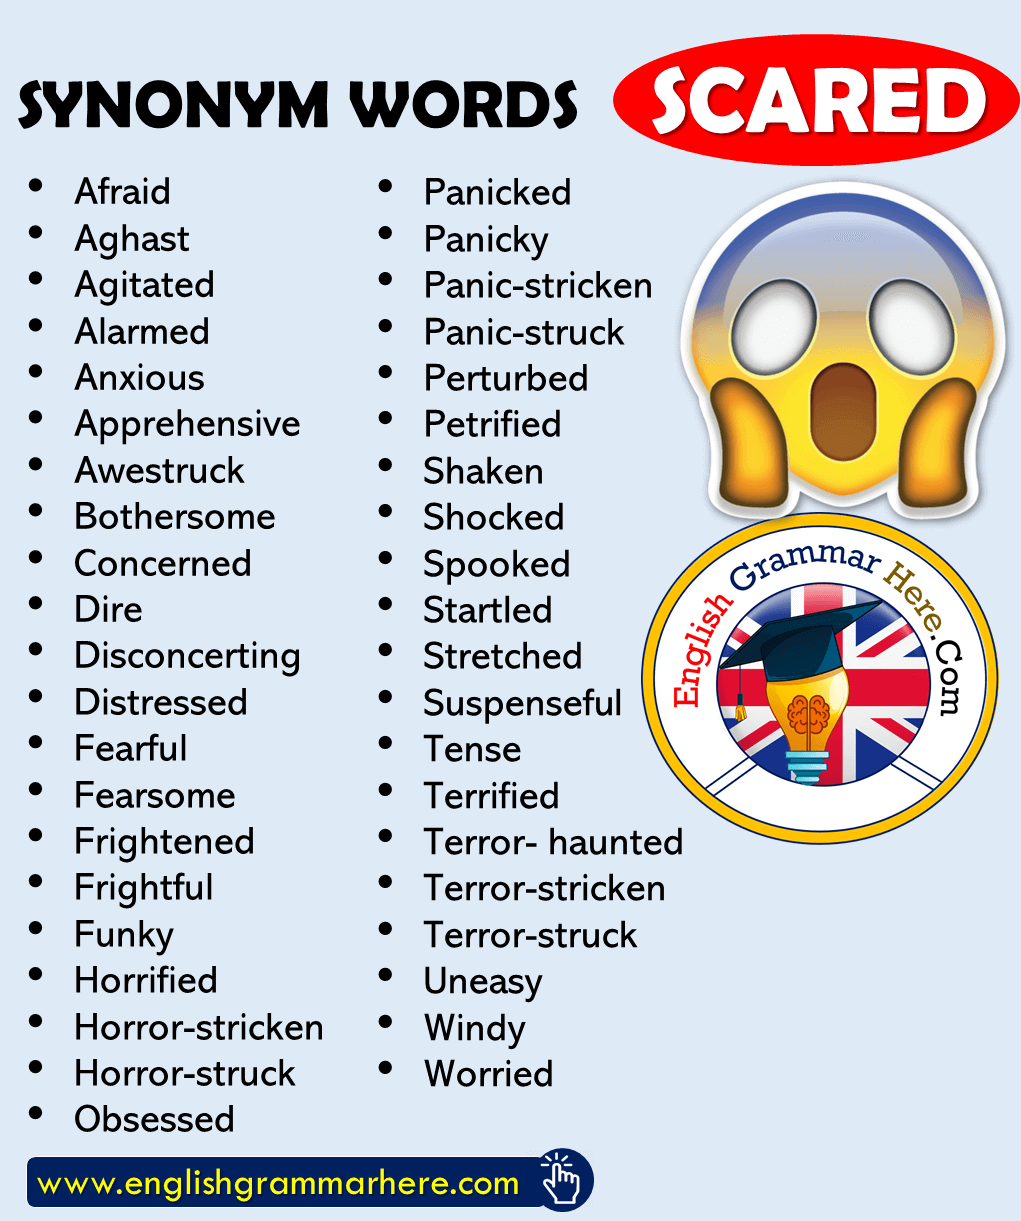 Synonym Vocabulary List, Synonyms with Scared